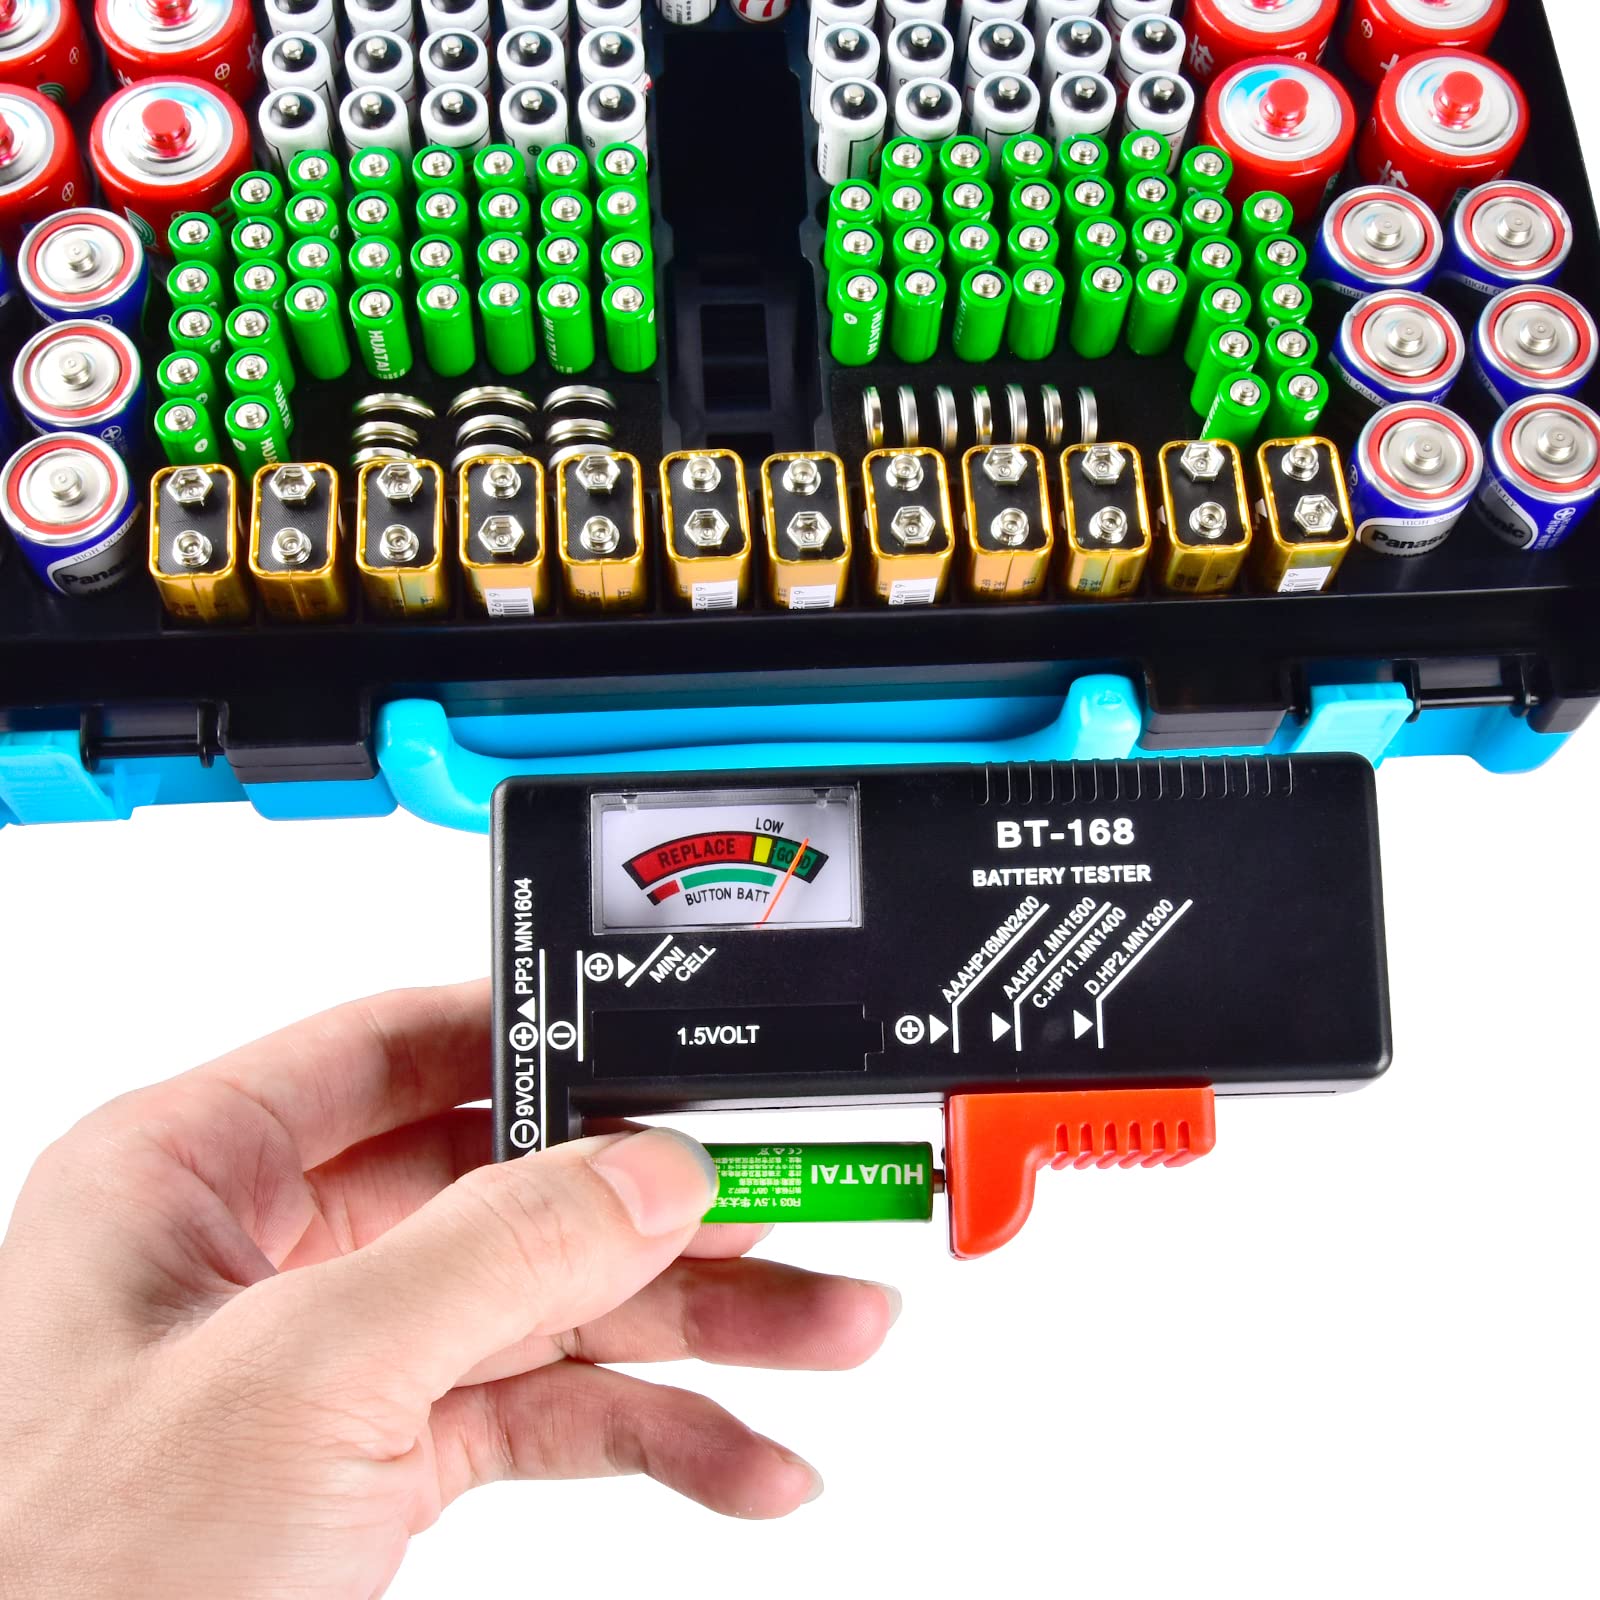 Battery Organizer Storage Case with Tester, Double-Sided Batteries